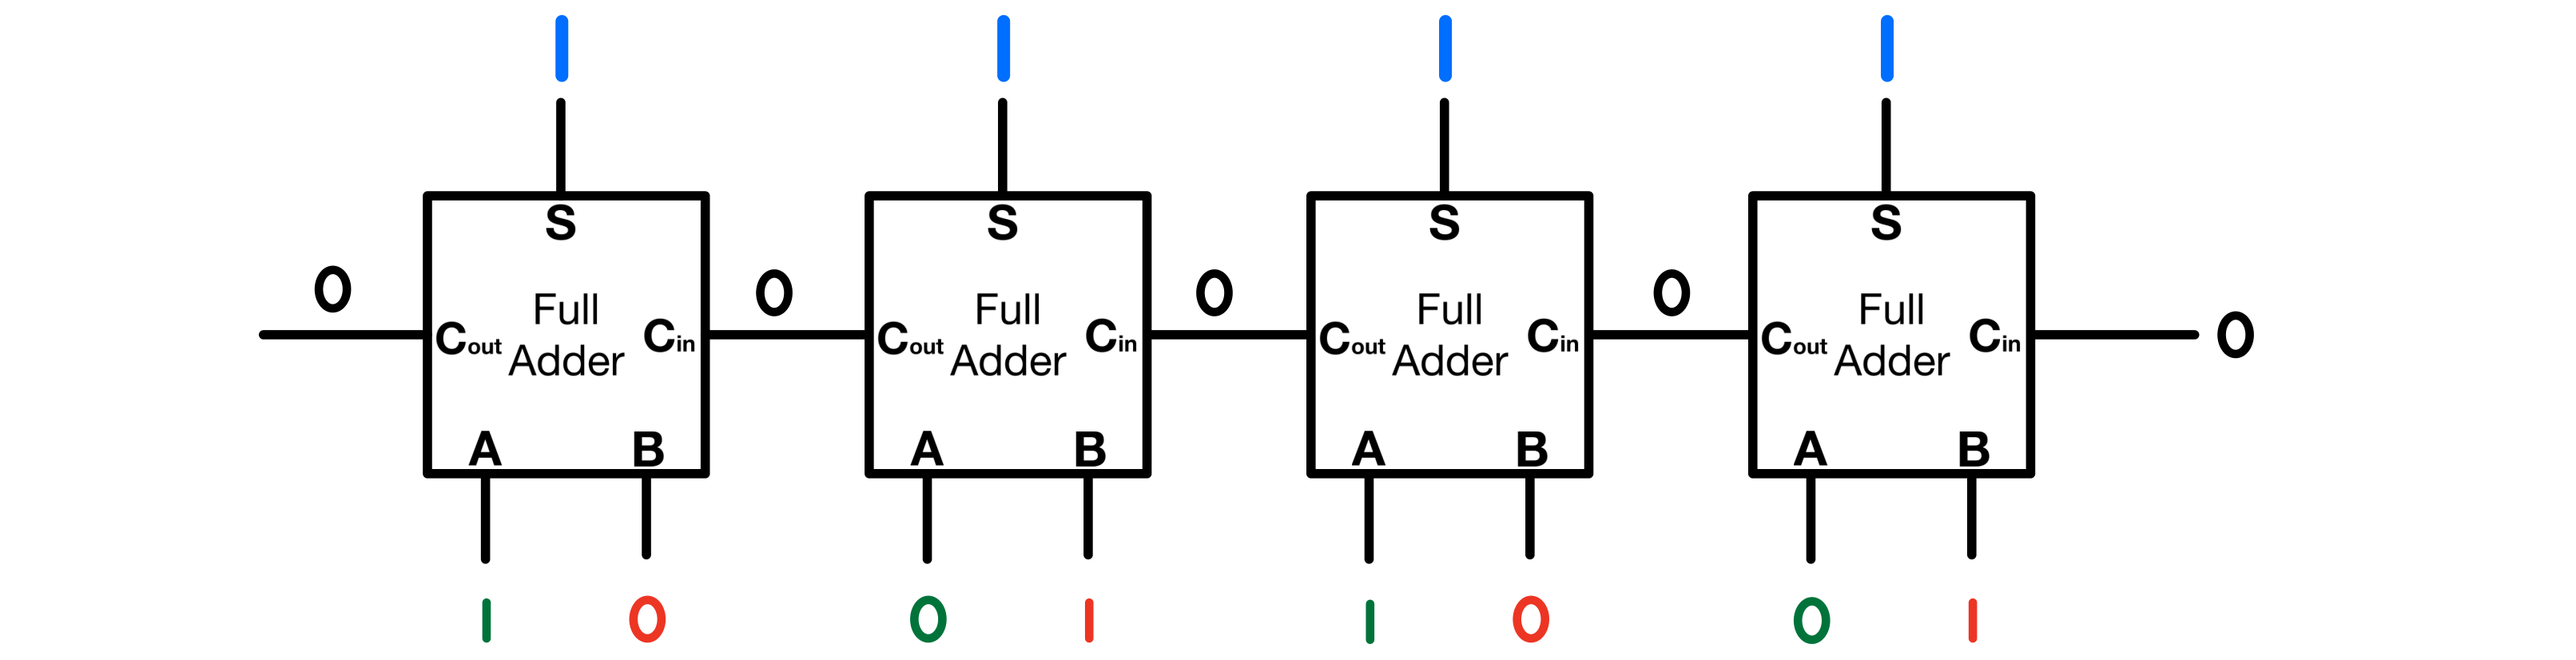 Figure 4: Addition of 1010 and 0101 Using a Full Adder